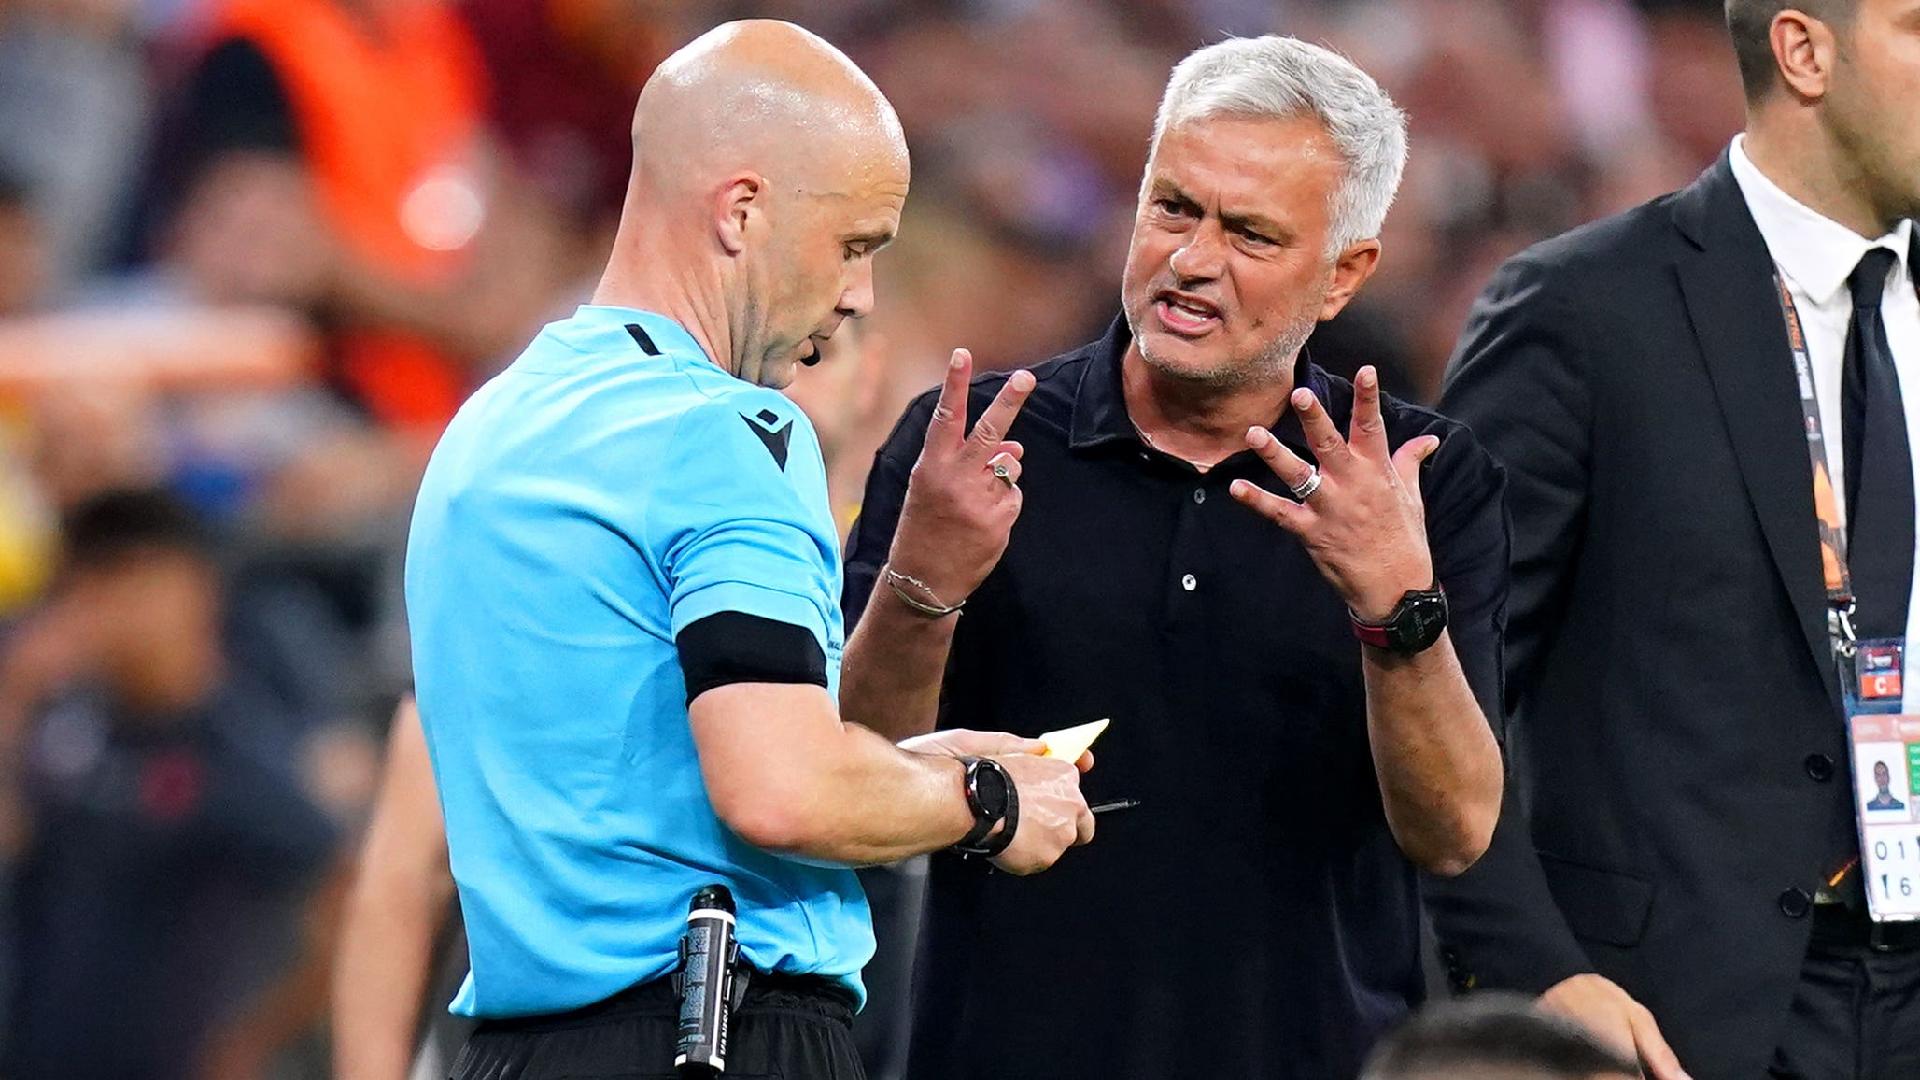 UEFA awaits reports following Jose Mourinho's rant at referee Anthony Taylor  | beIN SPORTS